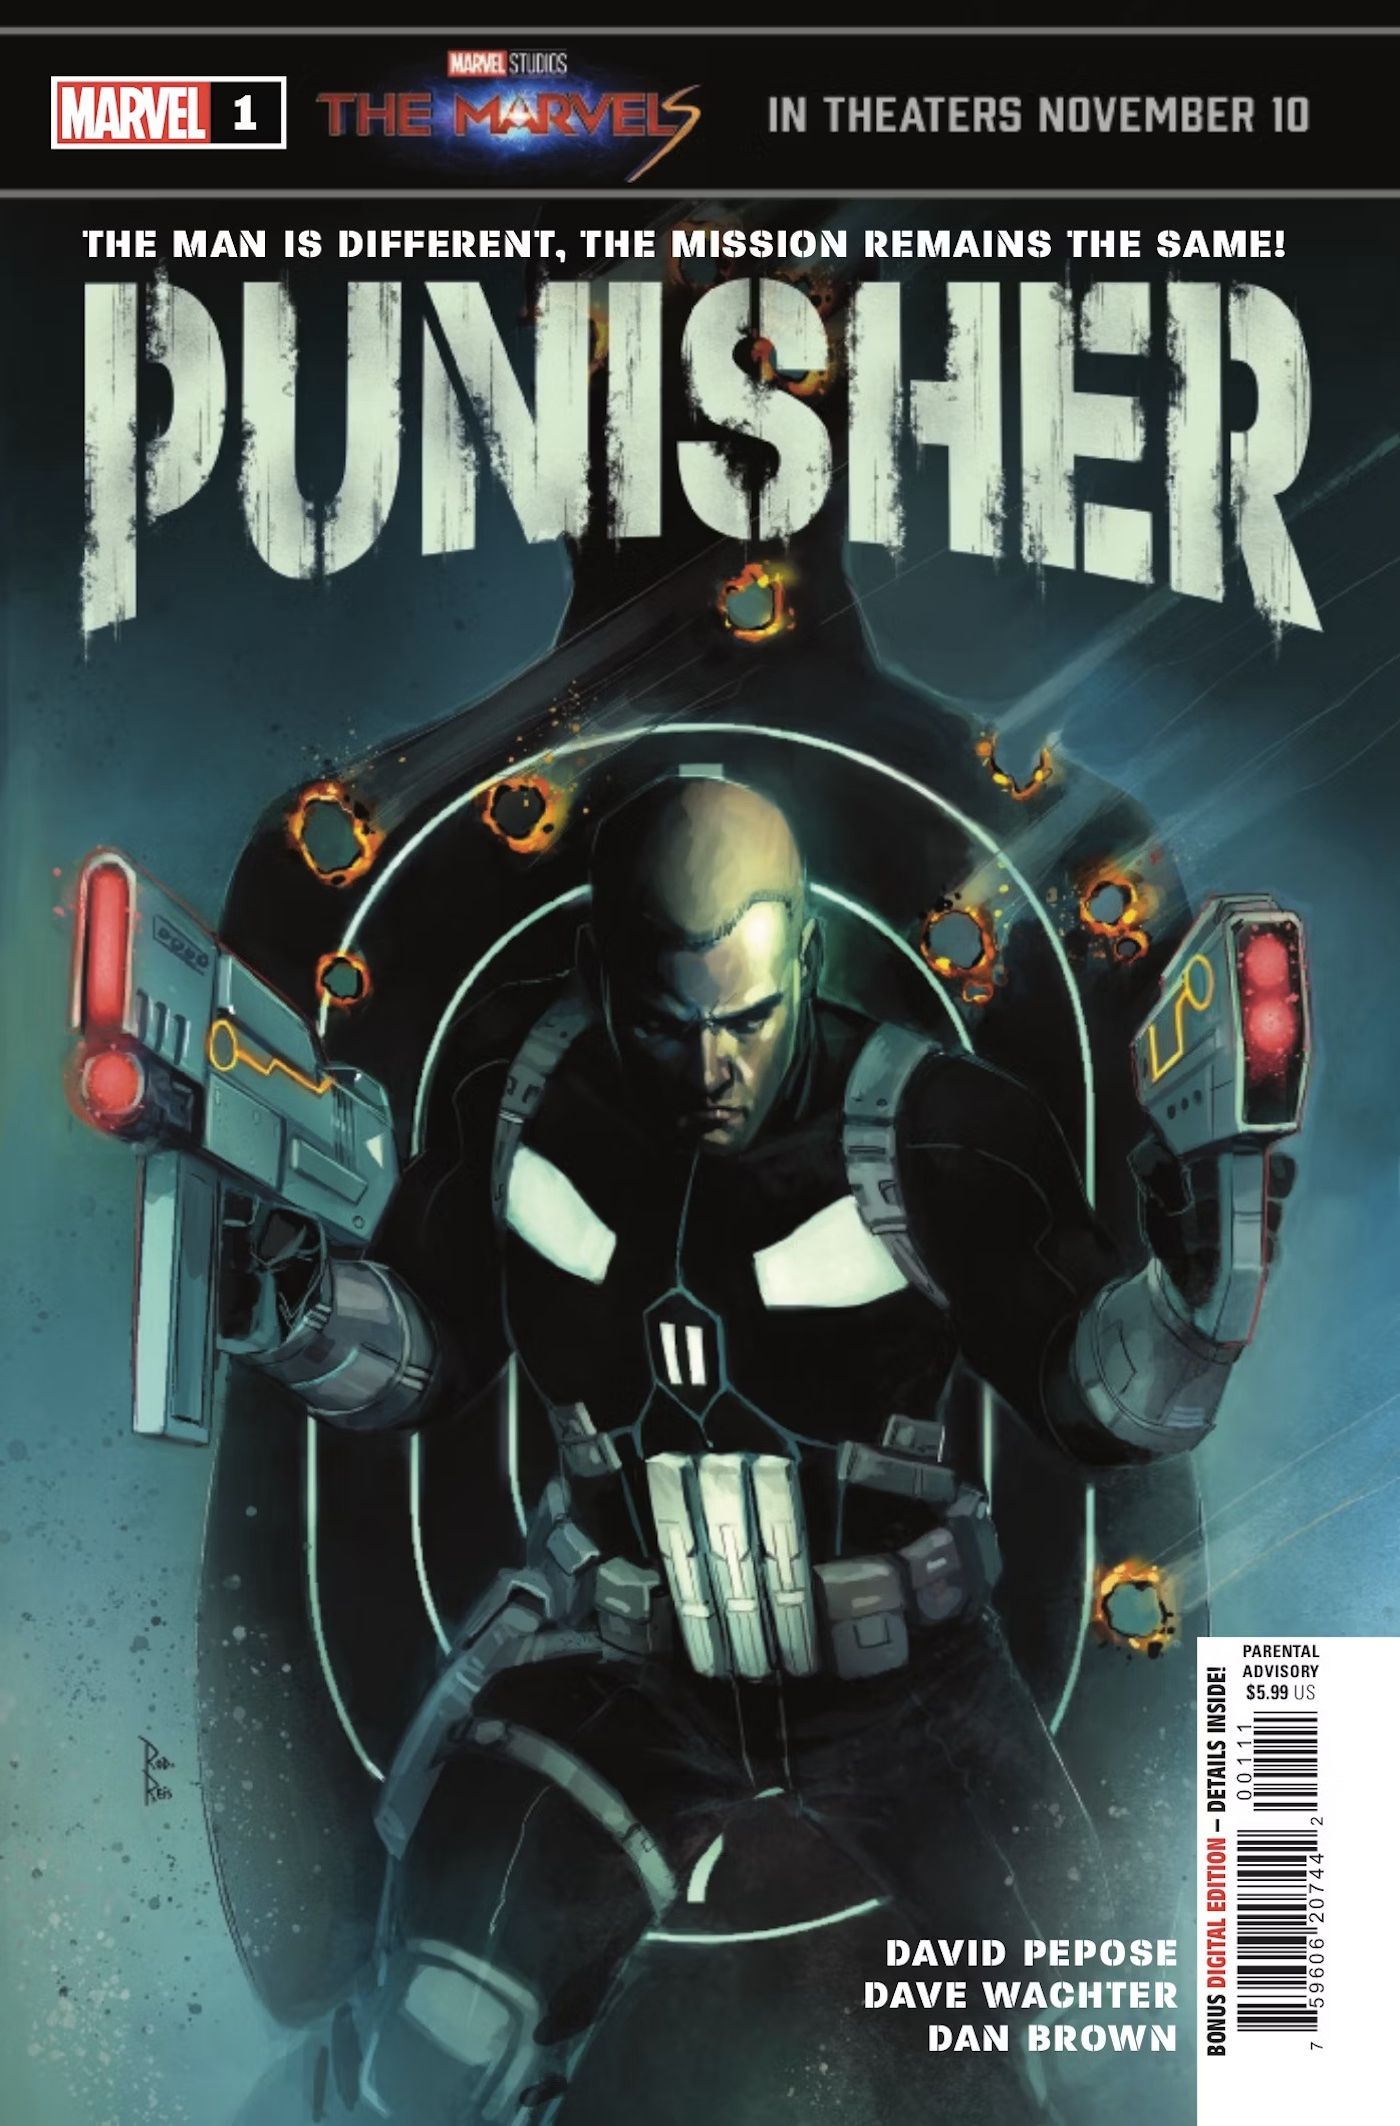 Marvel’s New Punisher Officially Debuts, as Joe Garrison Showcases Hi-Tech Weapons